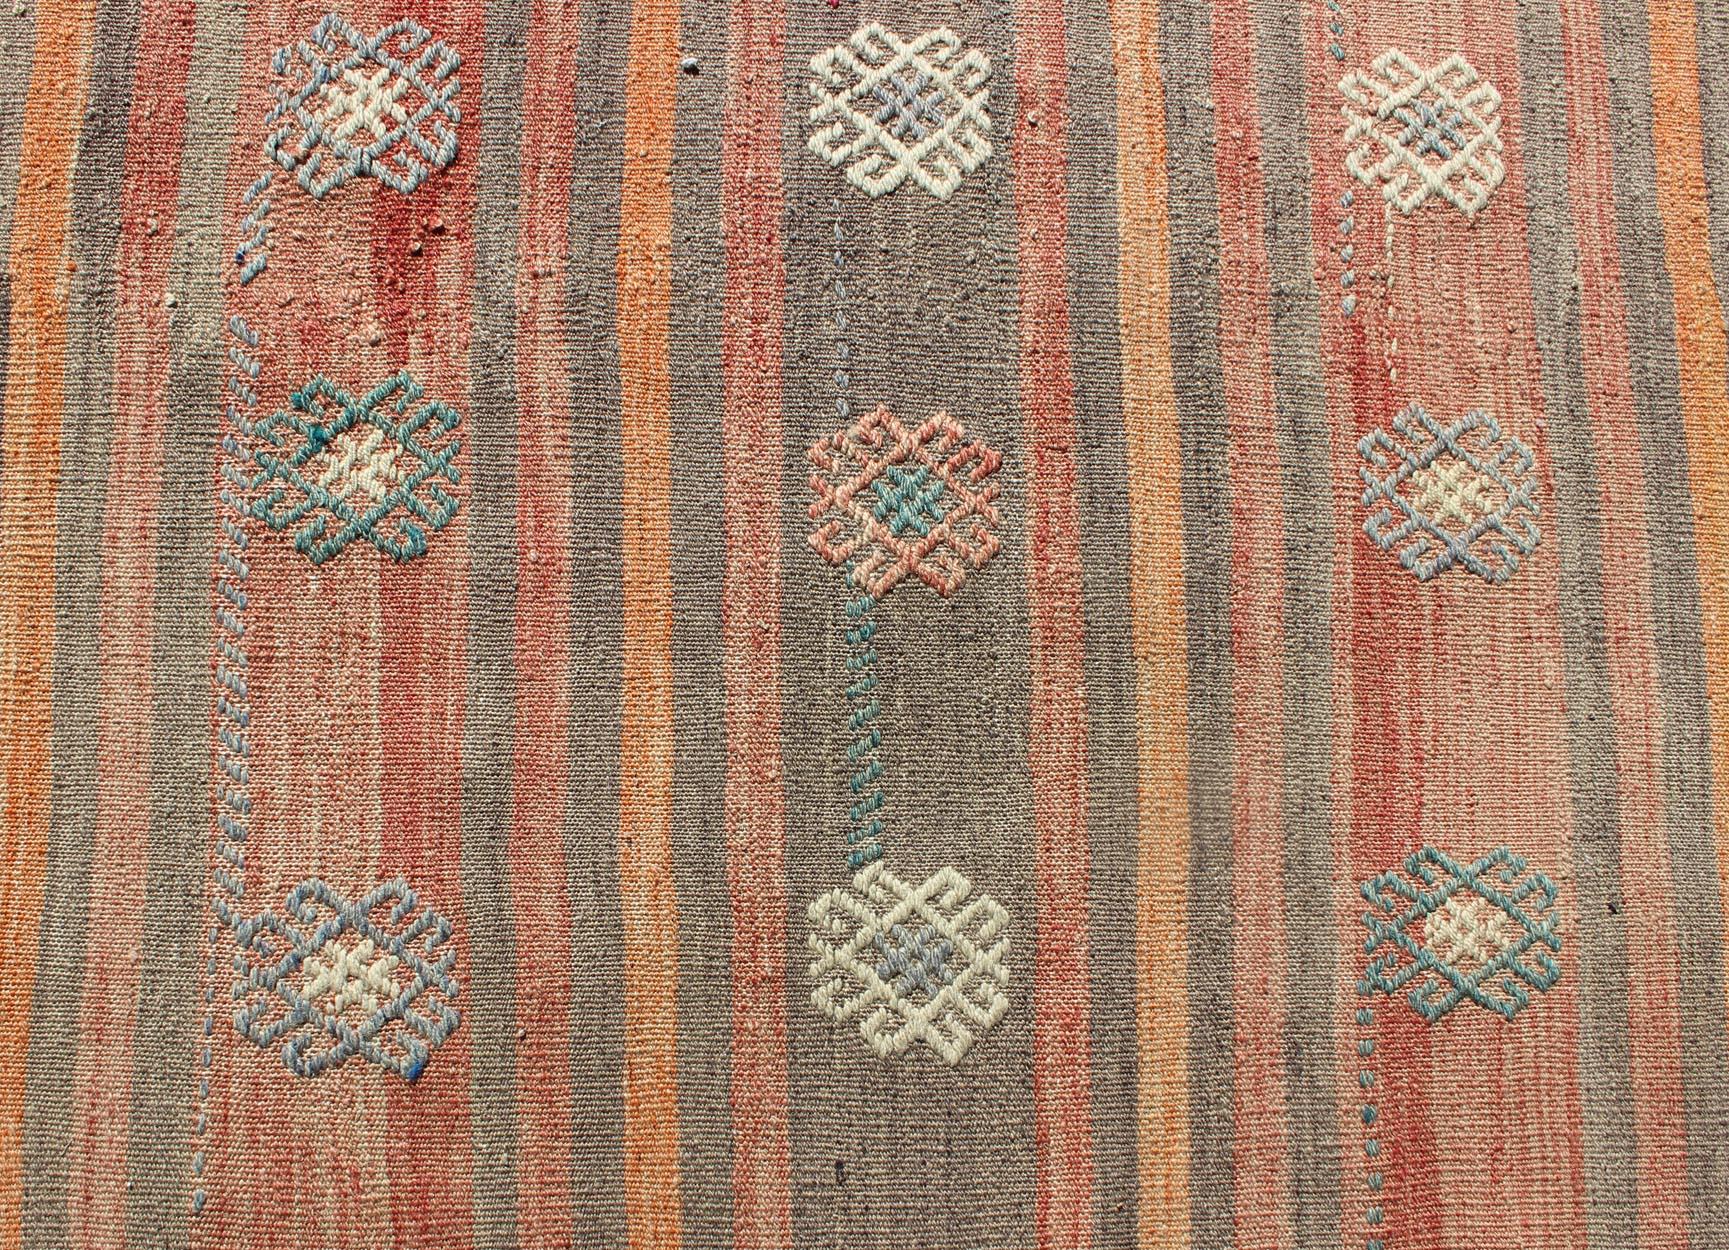 Colorful Vintage Turkish Flat-Weave Kilim Rug with Striped Geometric Design For Sale 4